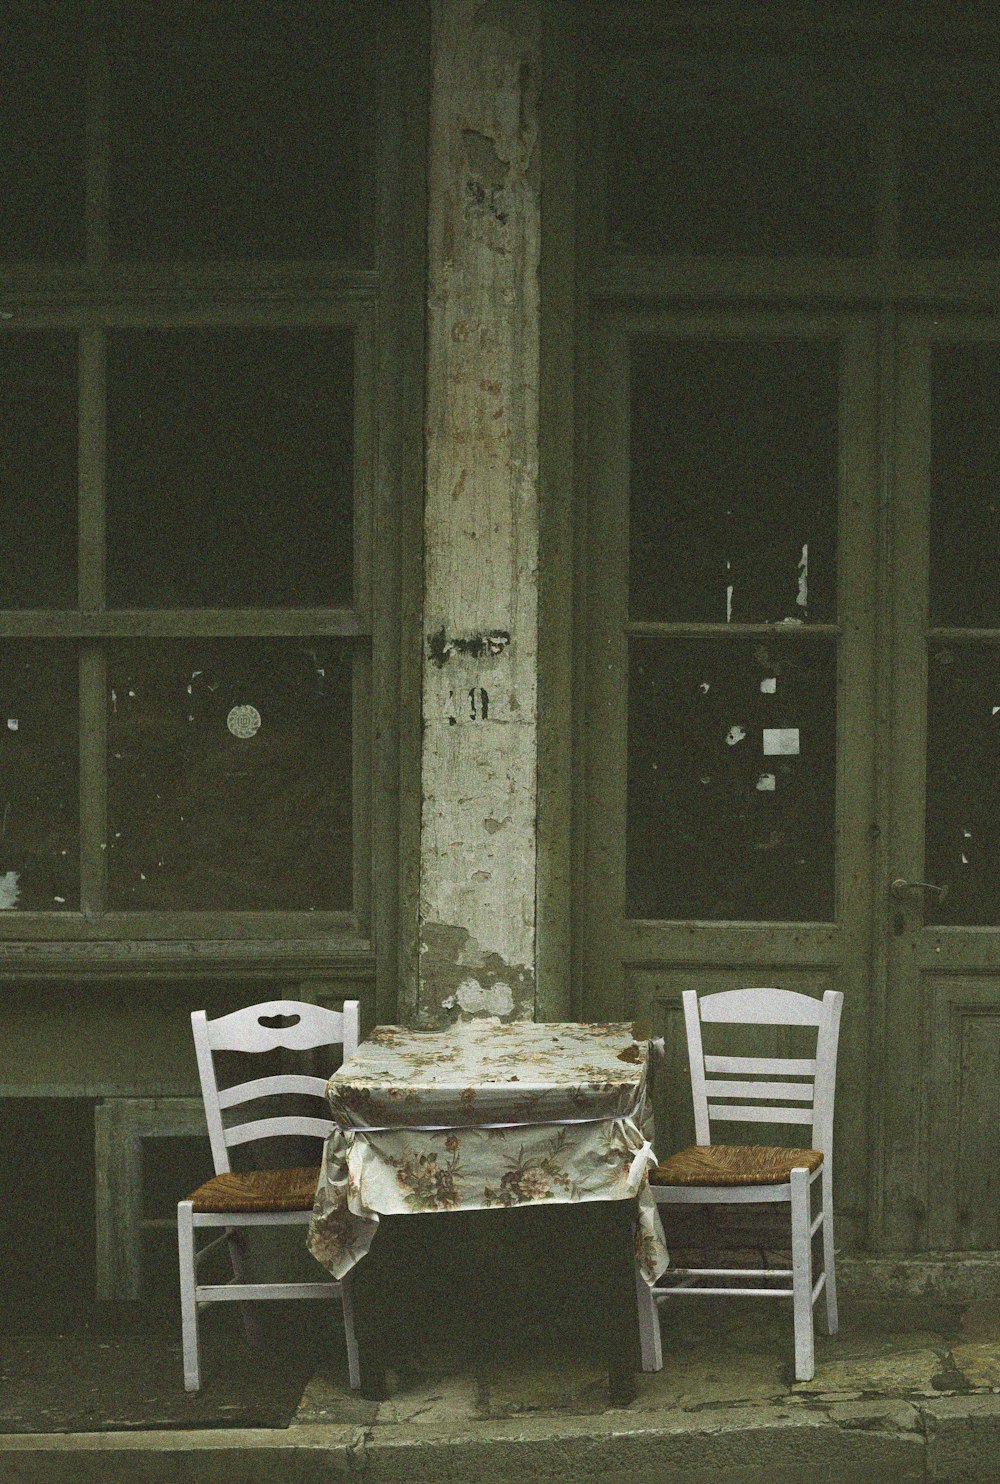 two chairs and a table in front of a building